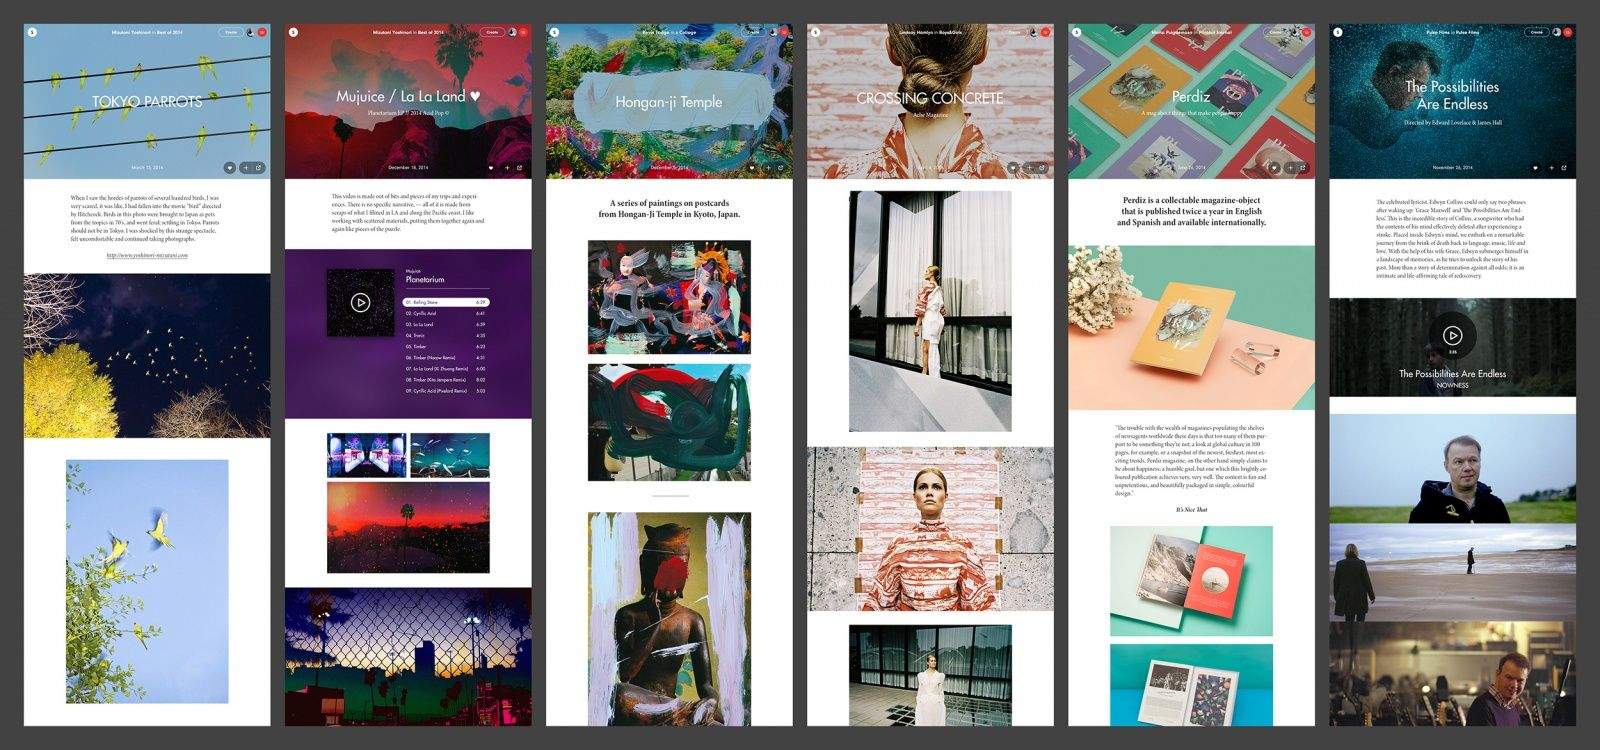 Stampsy is a new digital publishing platform for visual artists to elegantly design and curate content. Photo: Stampsy